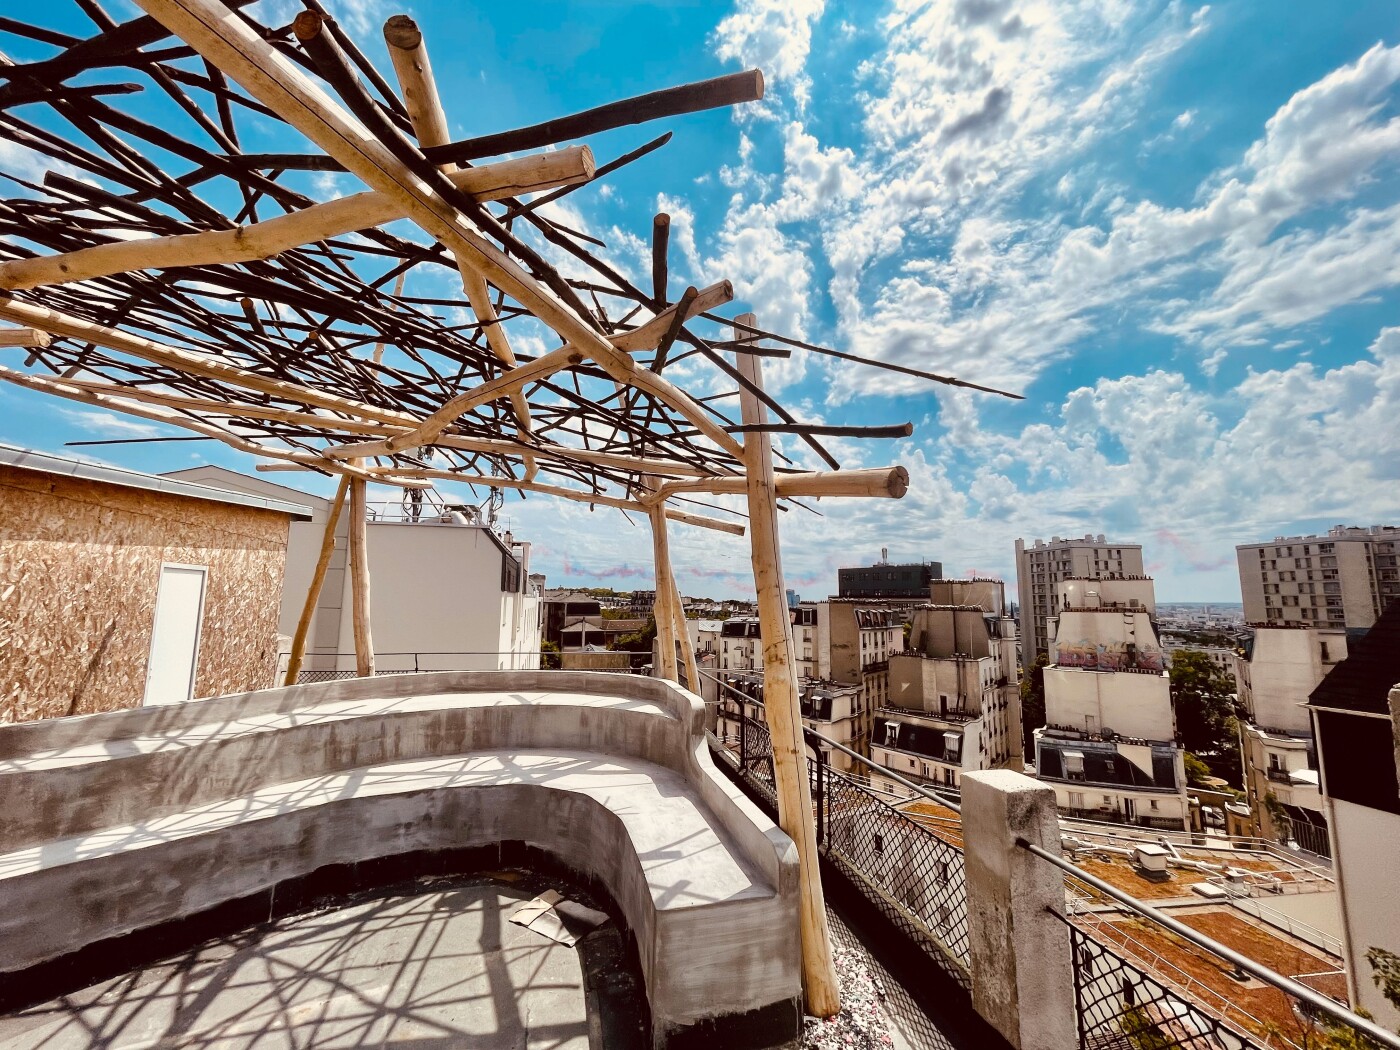 Rooftop of « La Bellevilloise » in Paris.
Which is a huge place for concert or exhibition or any év...